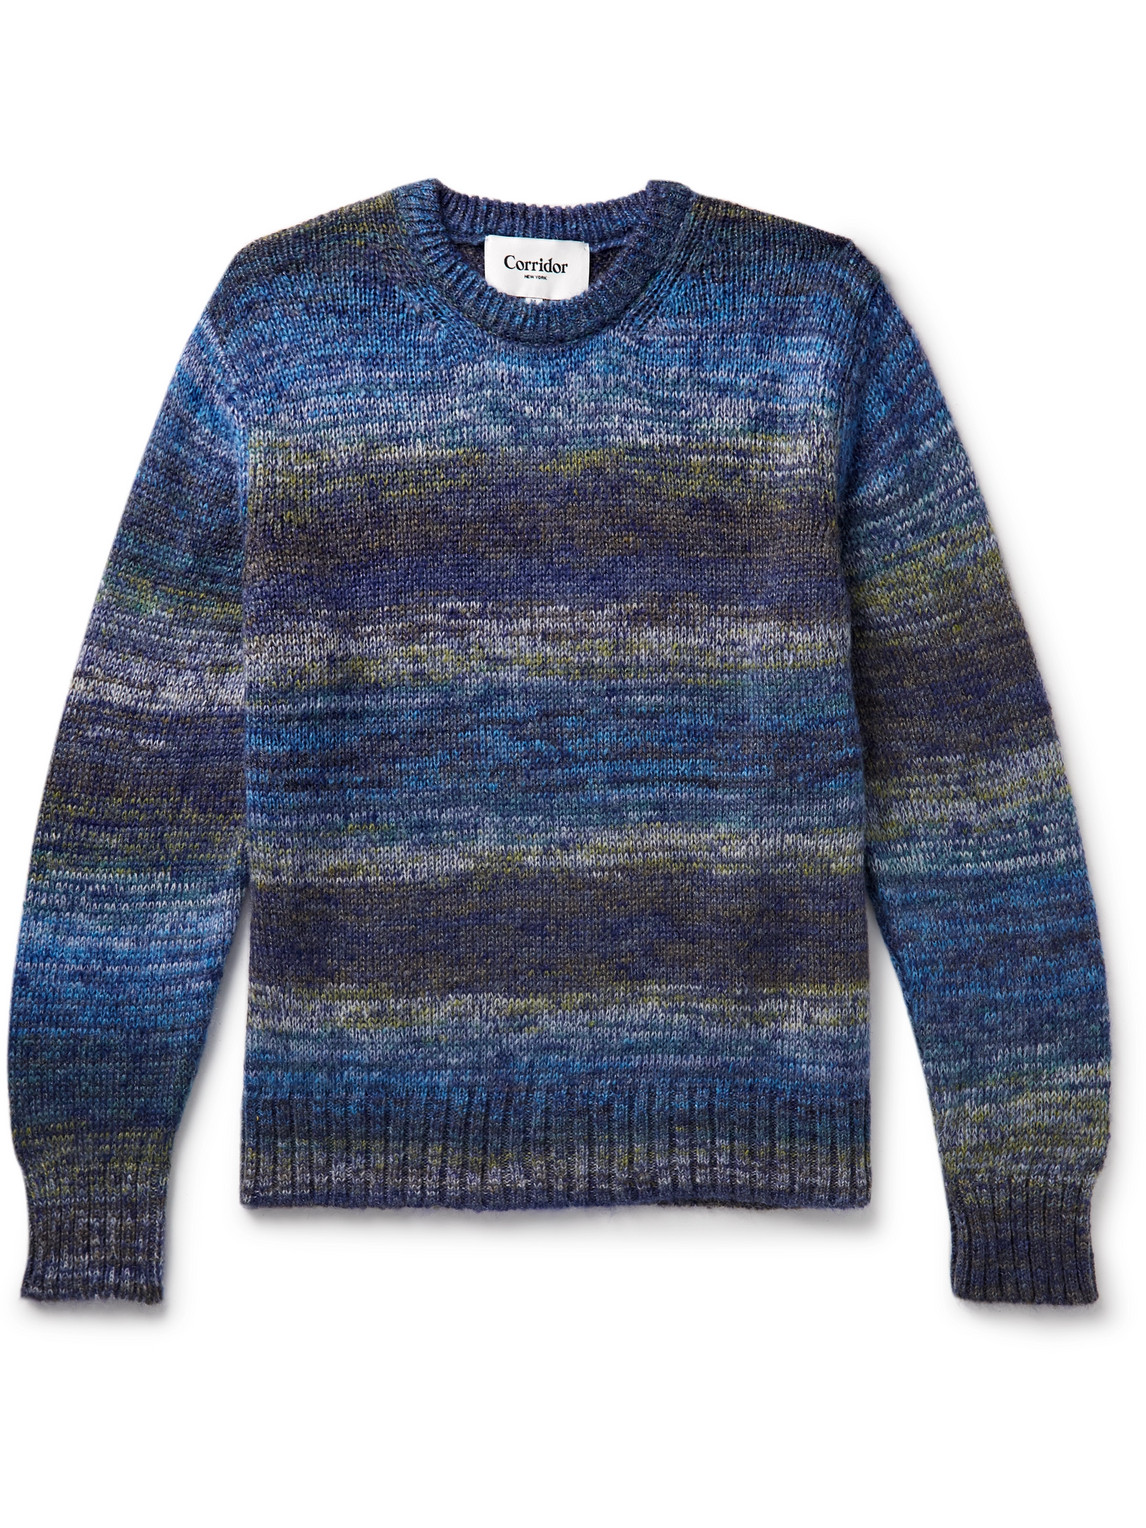 CORRIDOR SPACE-DYED KNITTED SWEATER